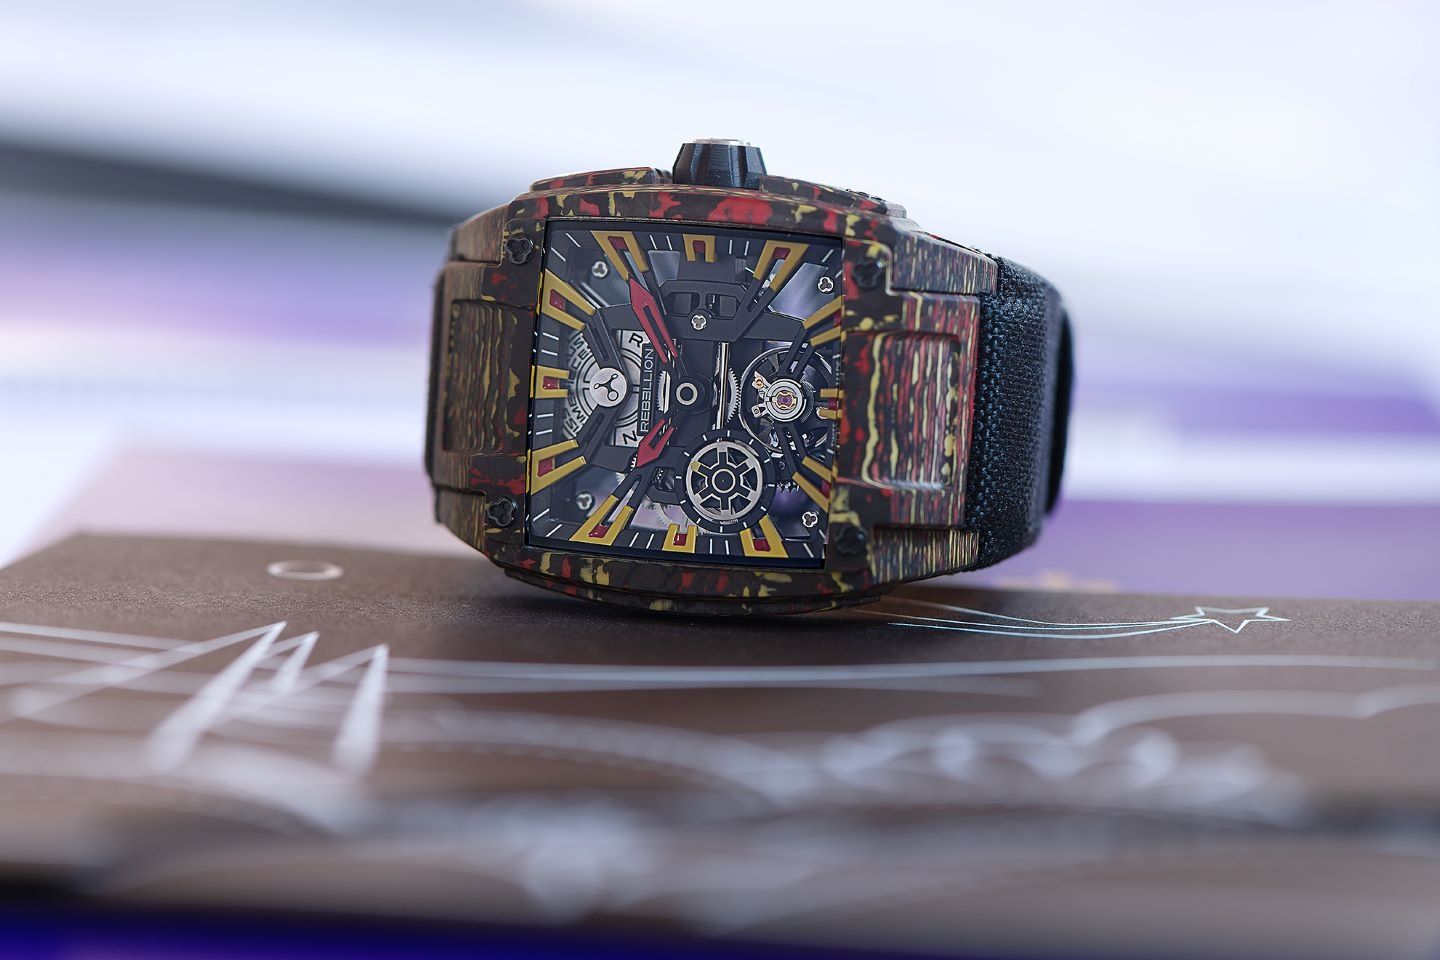 Launched at Watches and Wonders 2023, the Re-Volt is the first collaboration between Label Noir and Rebellion